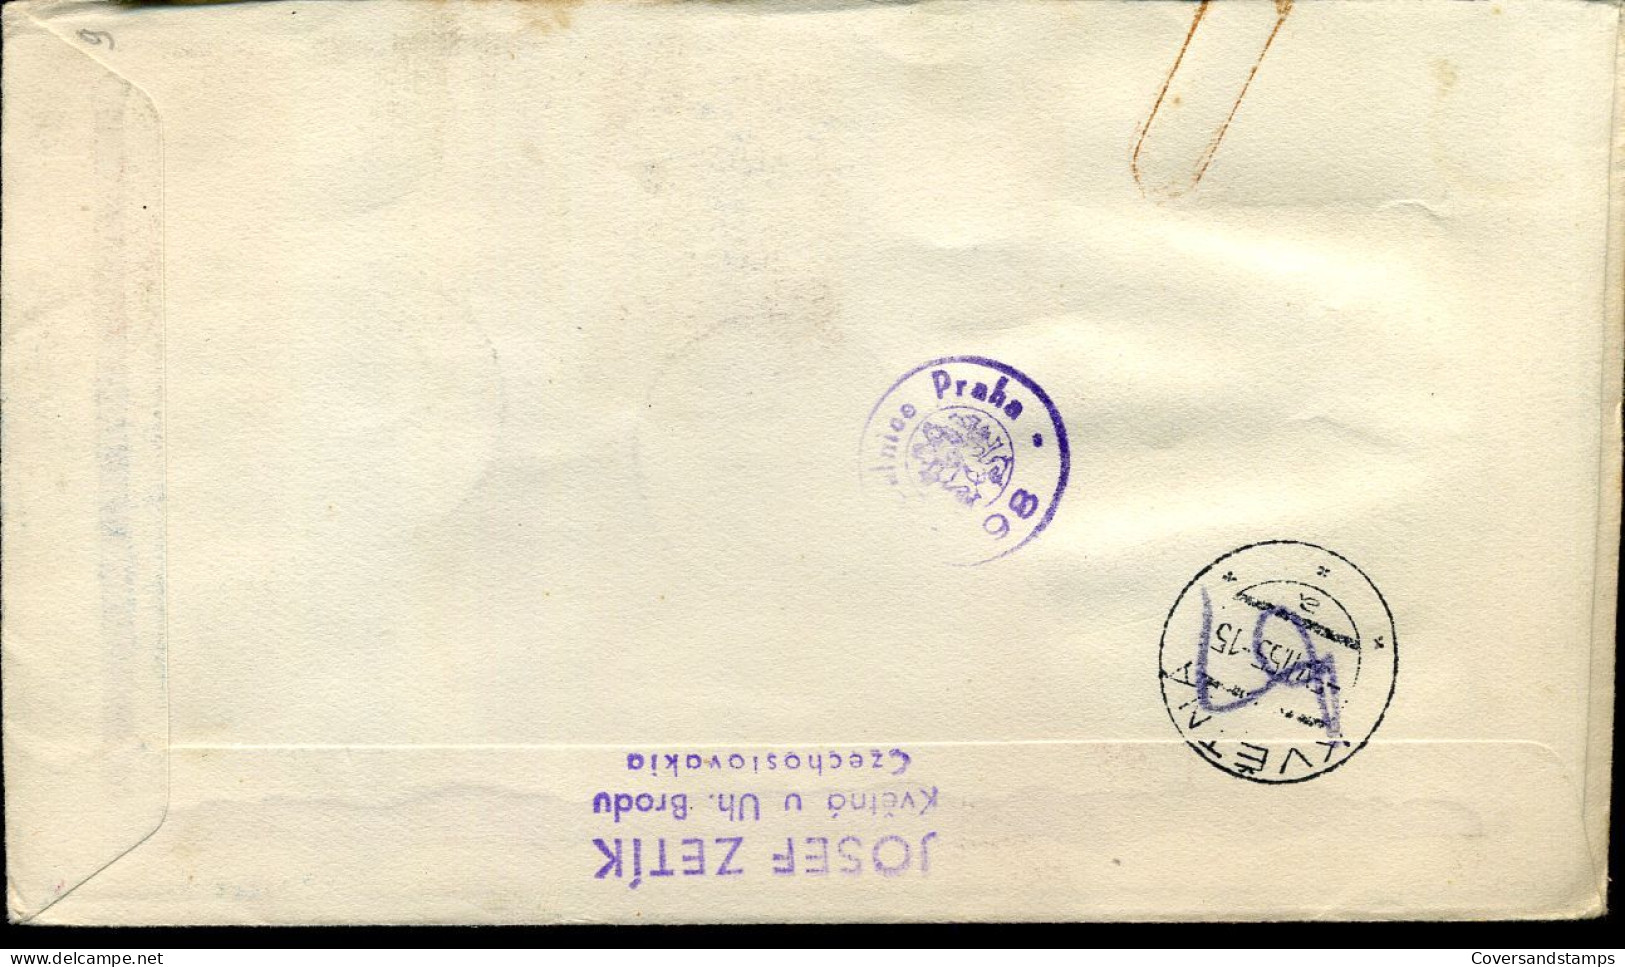 Registered Cover From Prague To Brussels, Belgium - Lettres & Documents